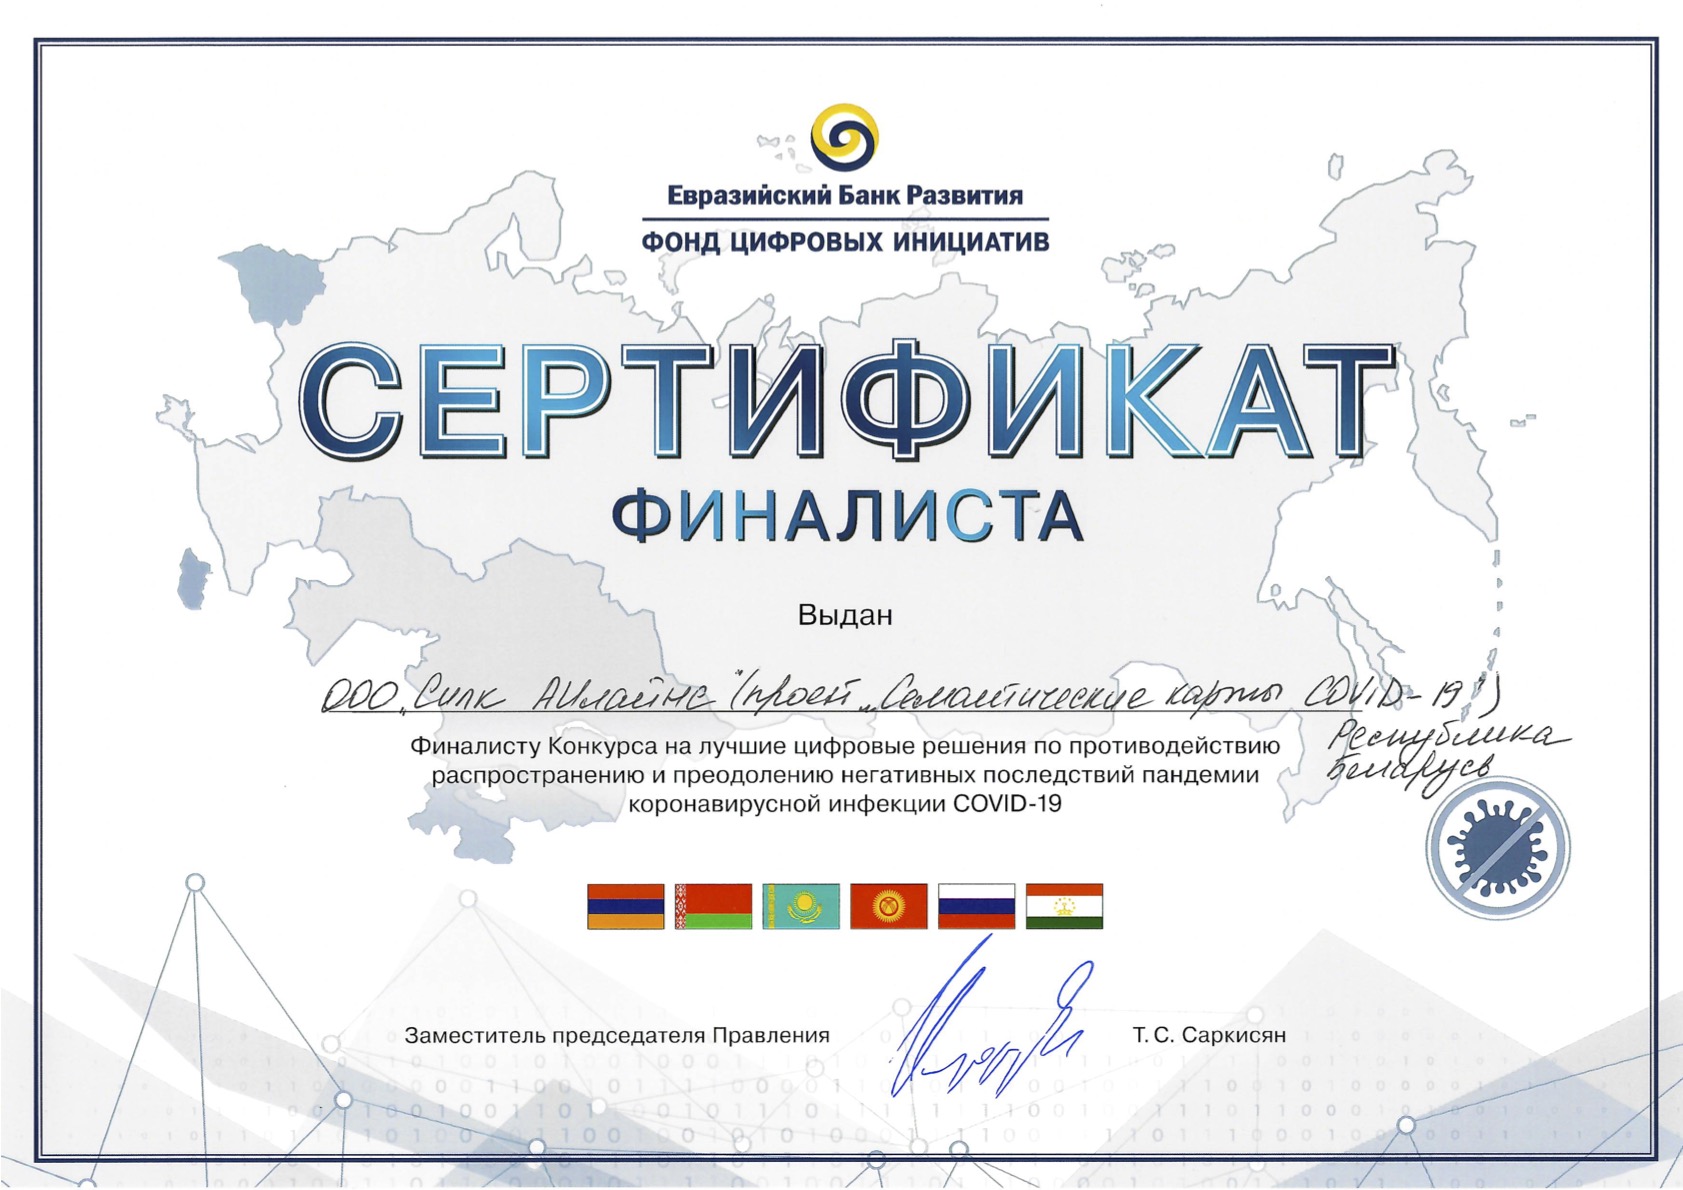 Eurasia Development Bank: Silk Data shortlisted in the competition